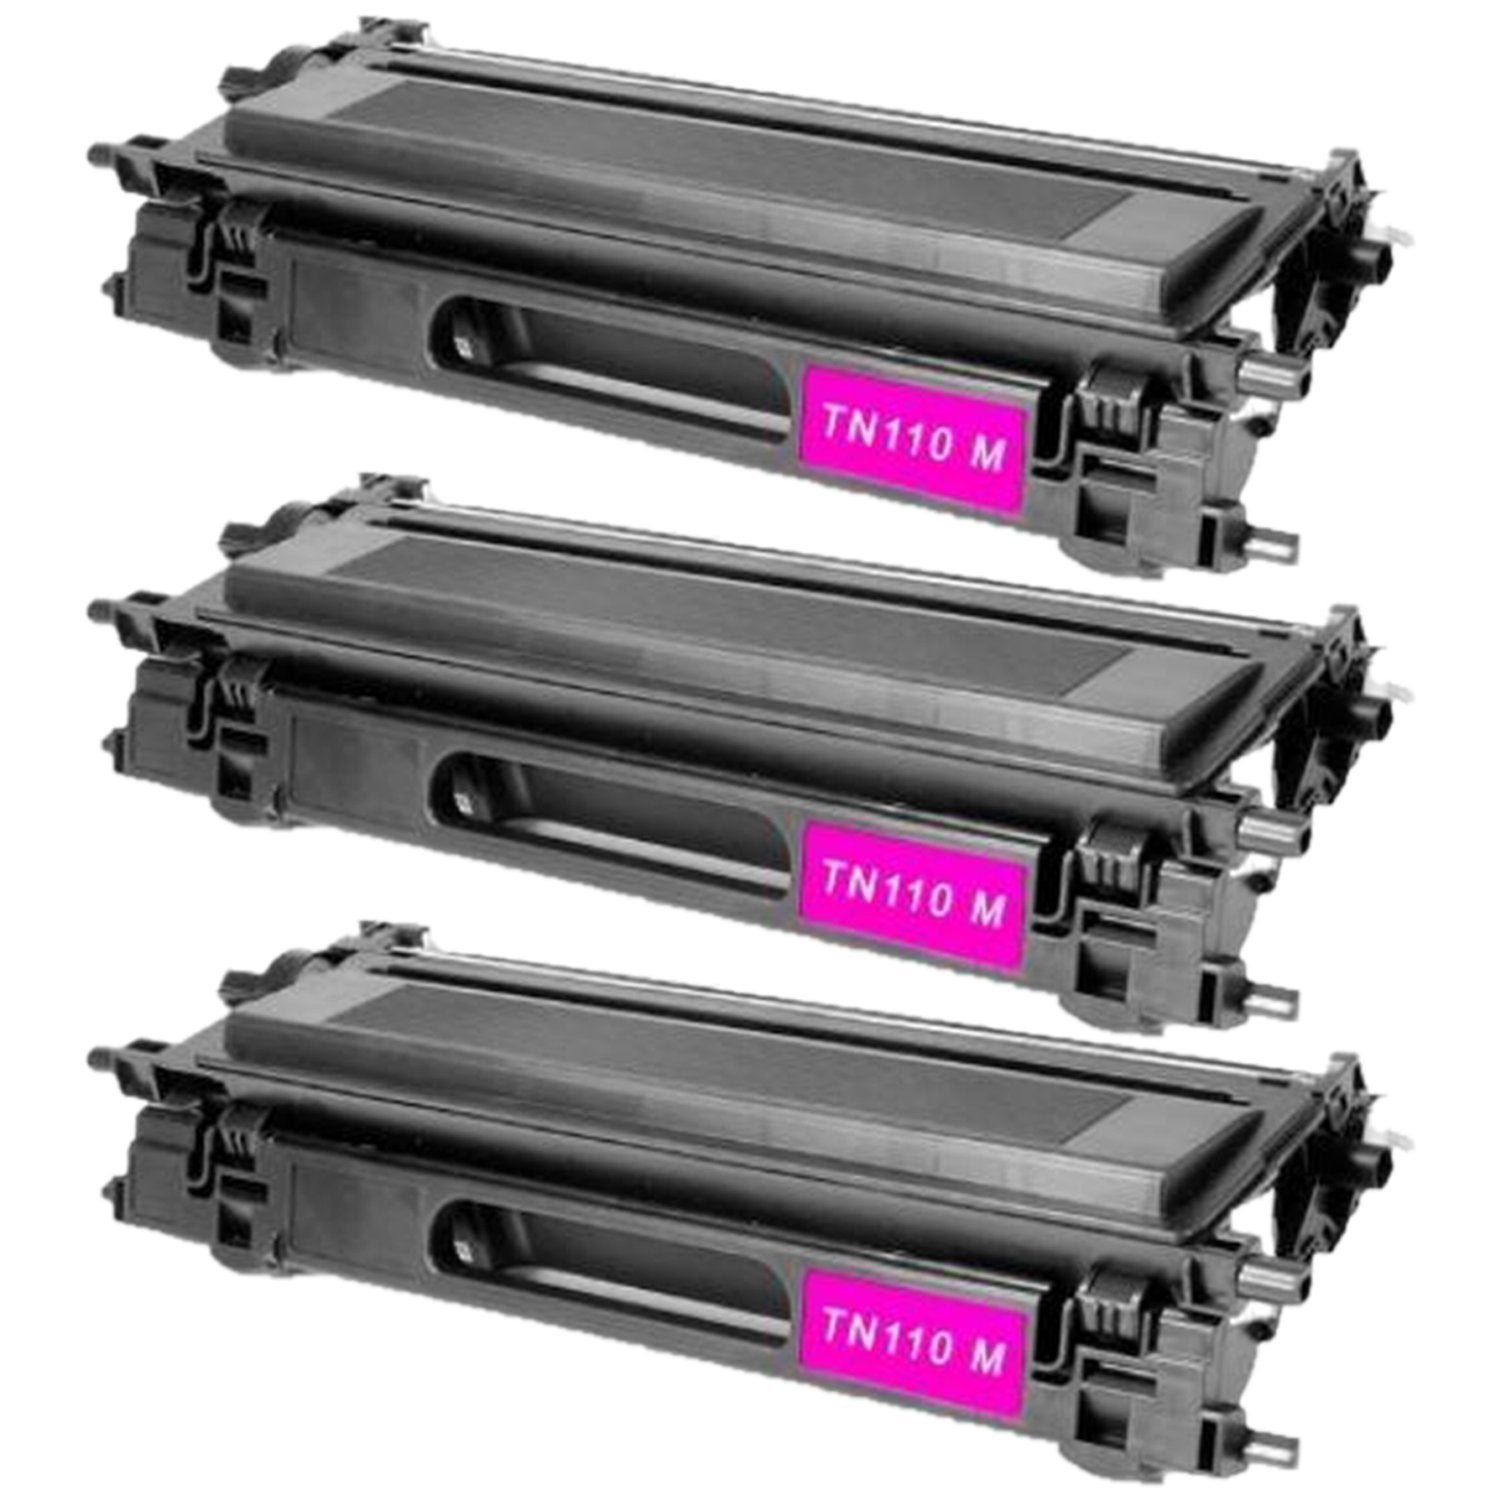 Absolute Toner Compatible Brother TN-110 TN110M High Yield Magenta Laser Toner Cartridge | Absolute Toner Brother Toner Cartridges